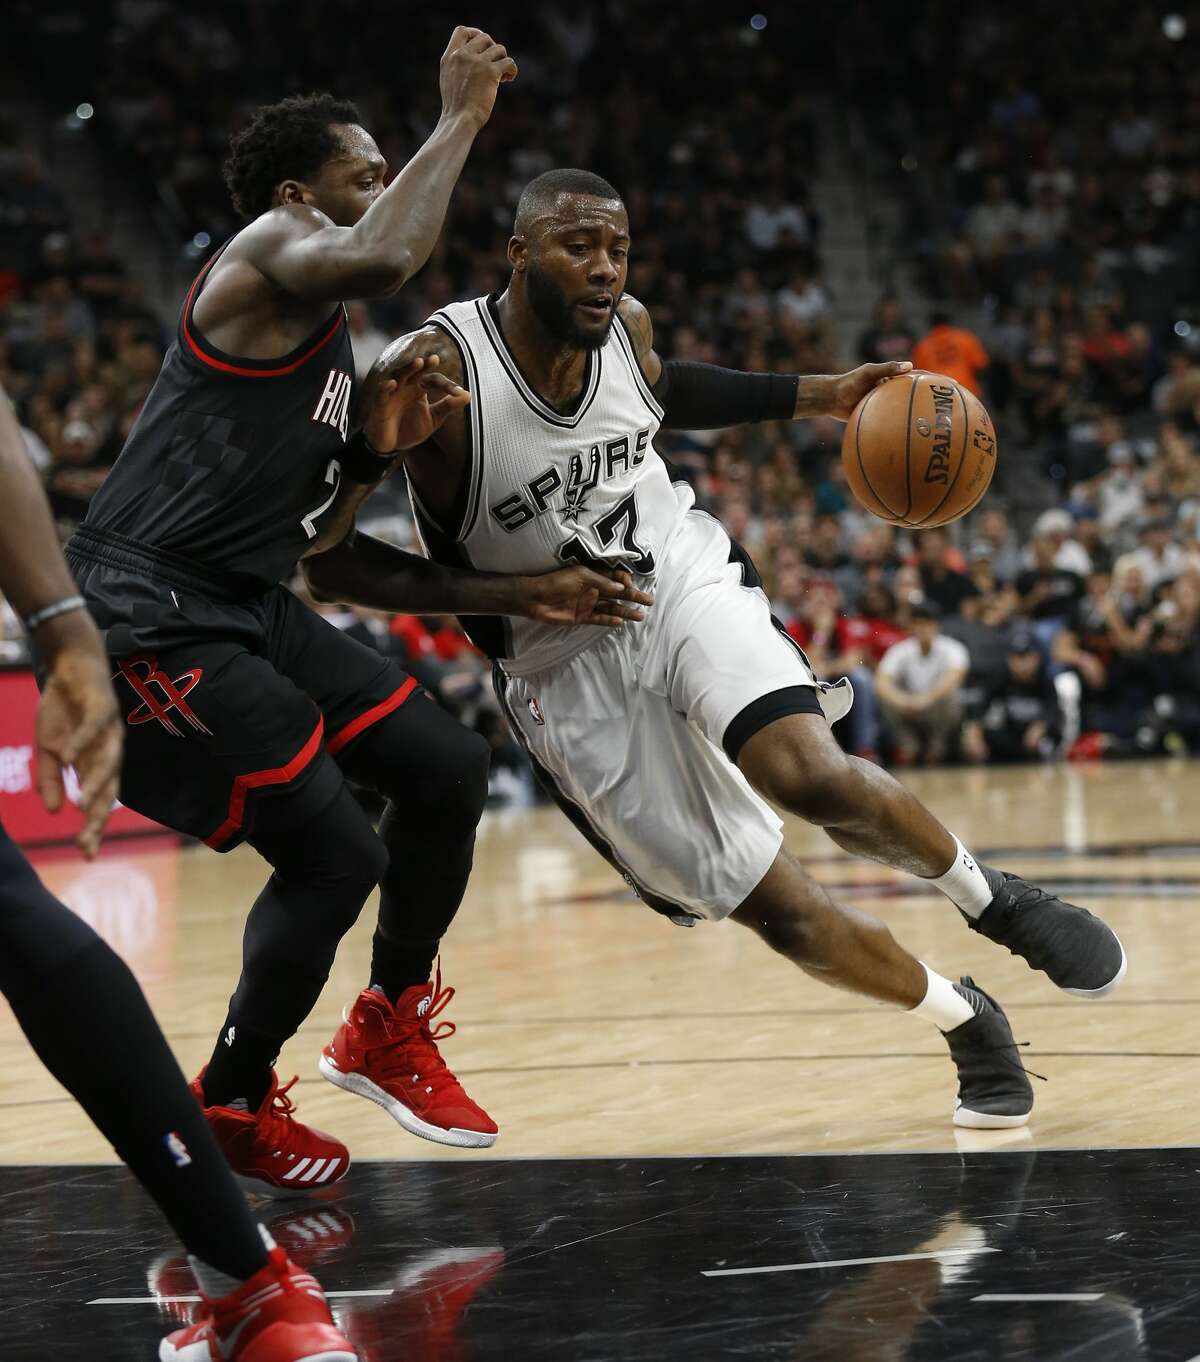 Spurs' Jonathon Simmons (17) drives on Houston Rockets' Patrick Beverley (02) in Game 5 of the Western Conference semifinals at the AT&T Center on Tuesday, May 9, 2017. (Kin Man Hui/San Antonio Express-News)